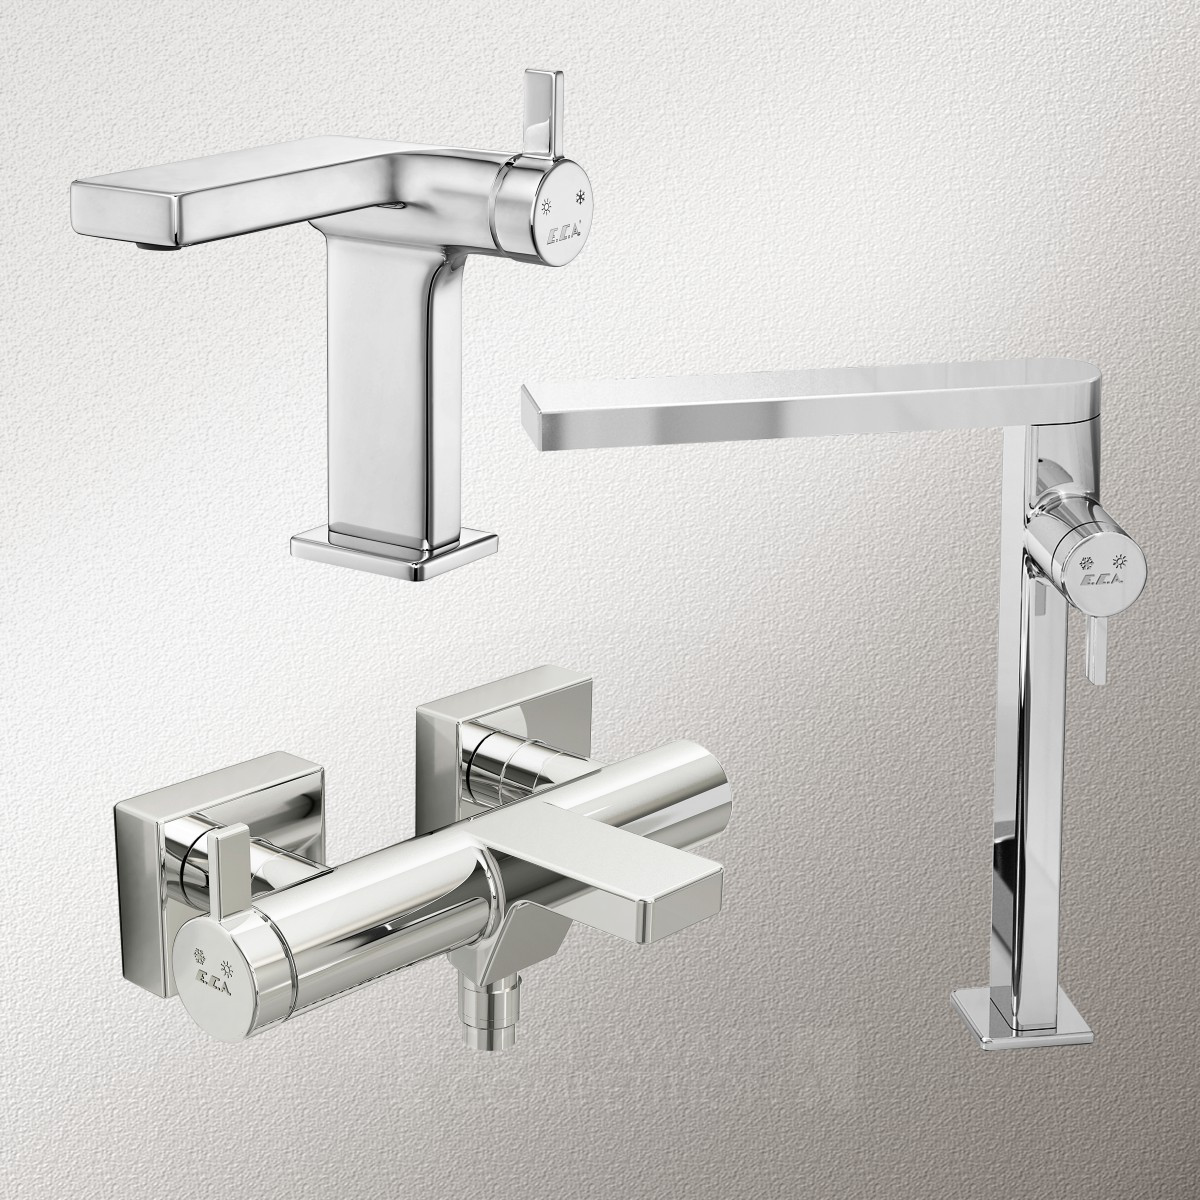 Purity Faucets by E.C.A. Design Team